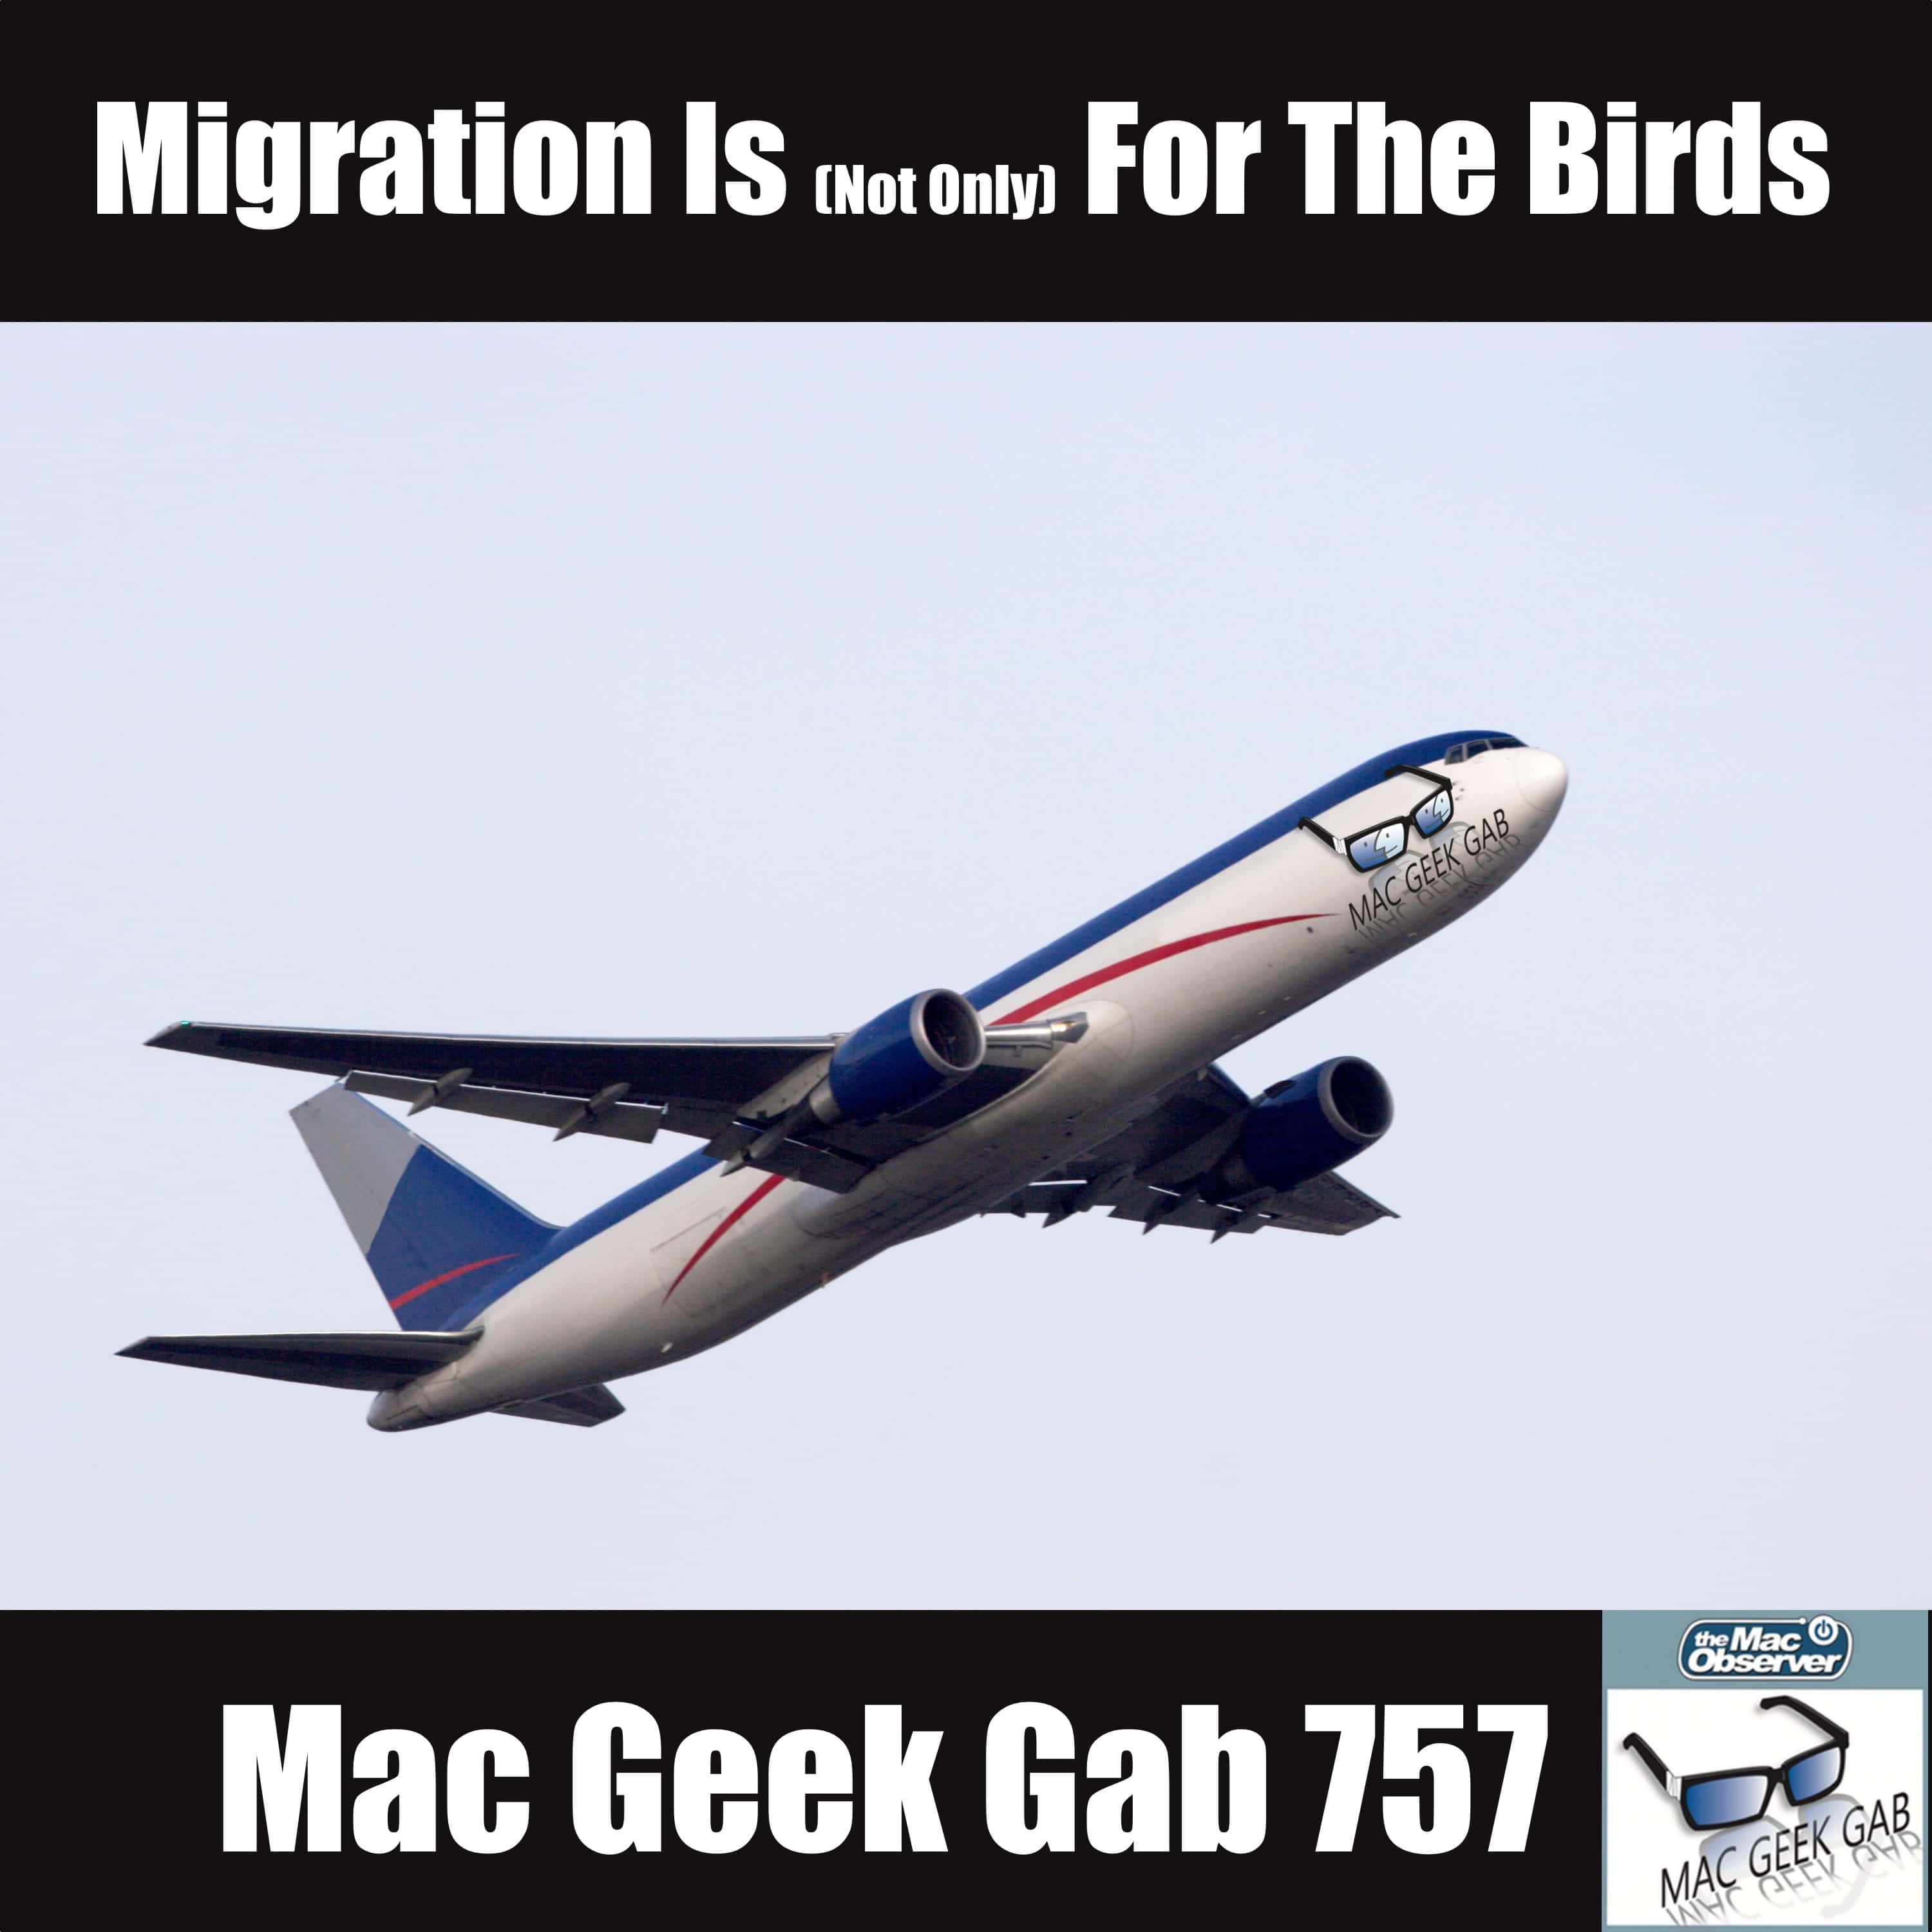 Migration Is (Not Only) For The Birds – Mac Geek Gab 757